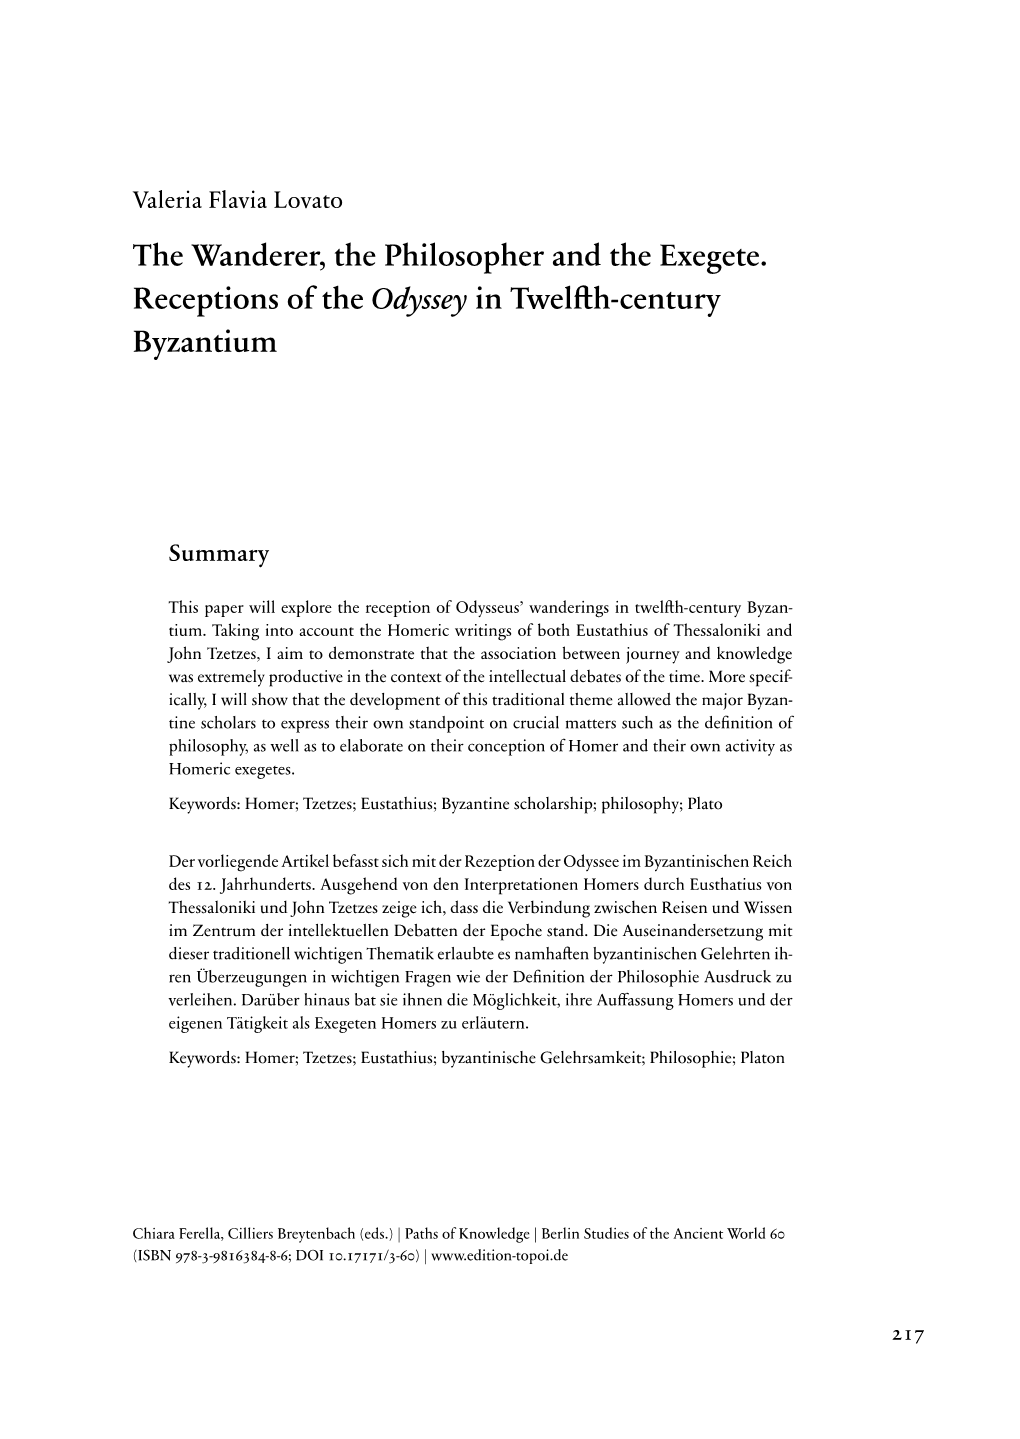 The Wanderer, the Philosopher and the Exegete. Receptions of the Odyssey in Twelfth-Century Byzantium